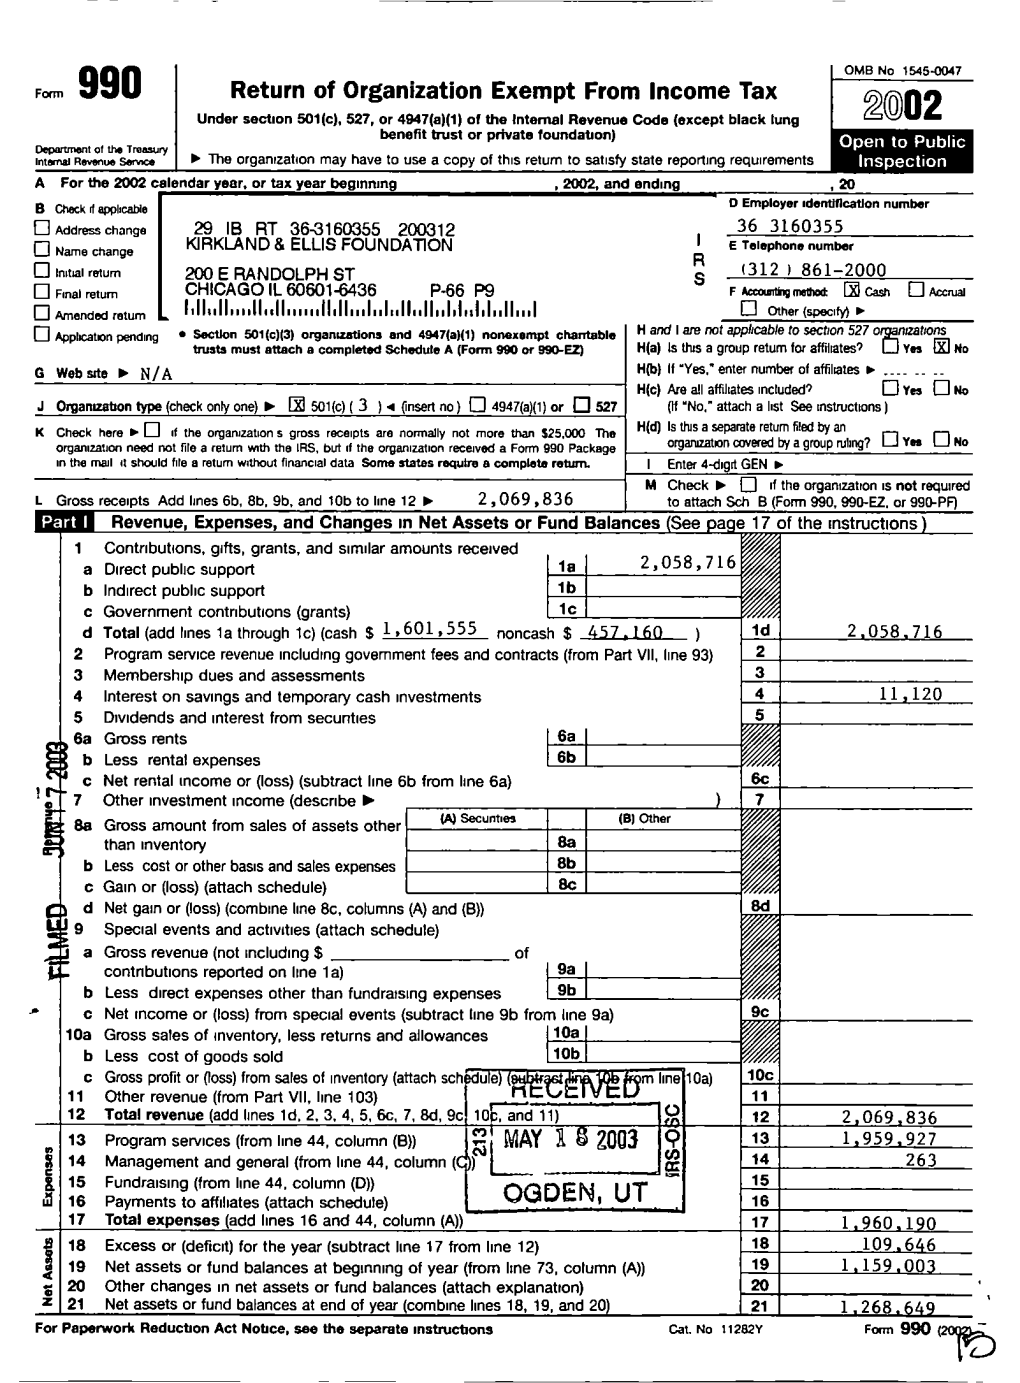 Form 990 Return of Organization Exempt from Income